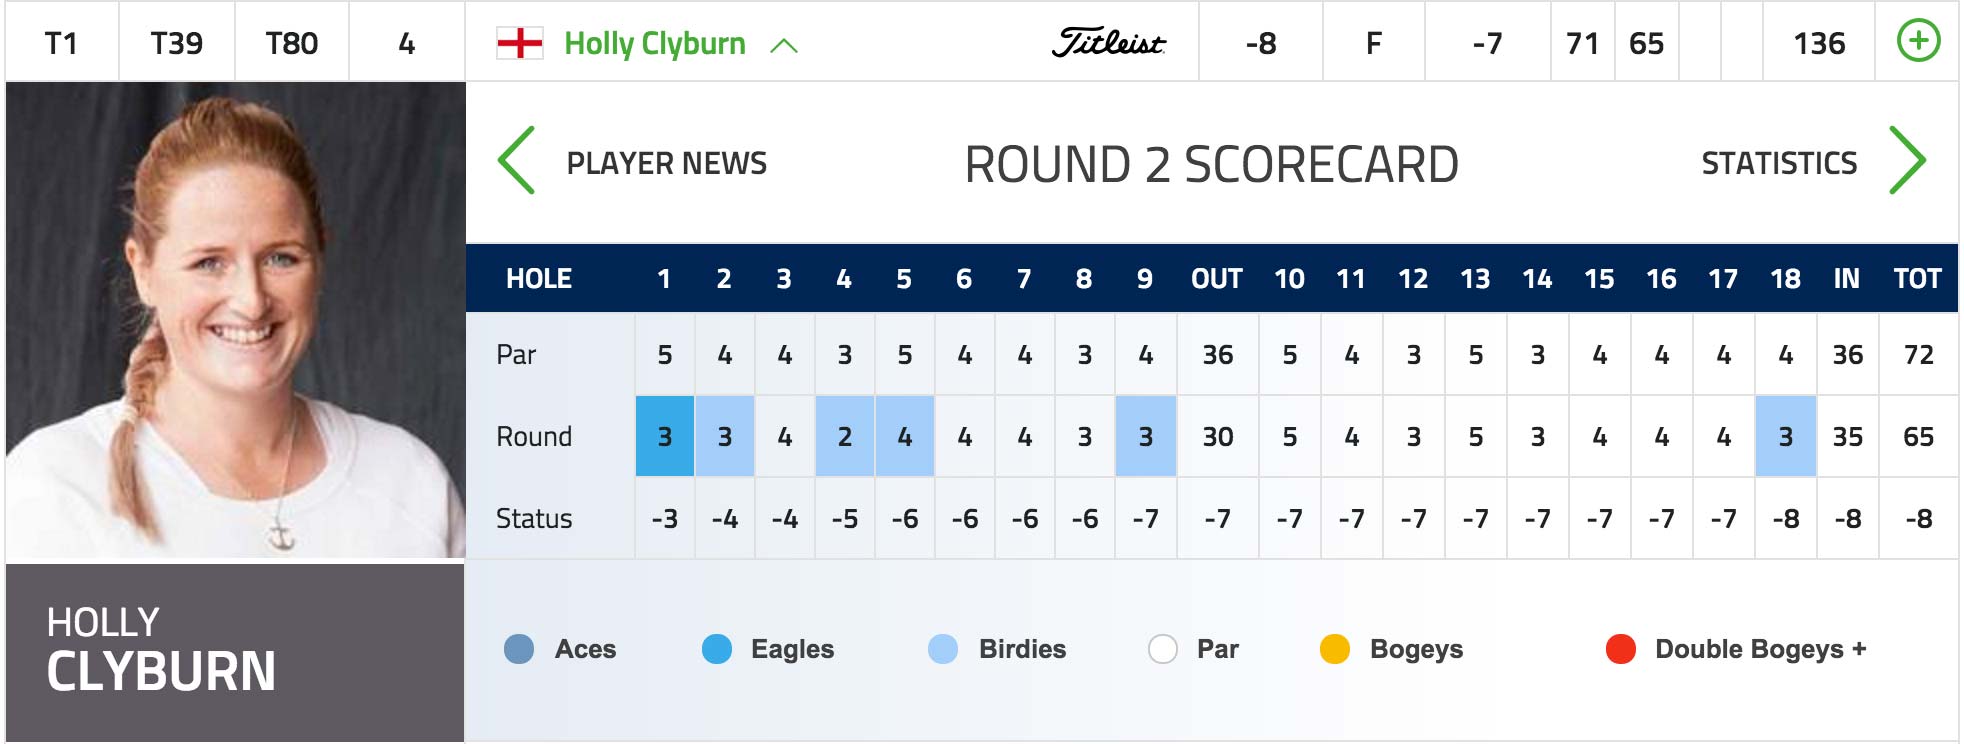 Holly Clyburn Shot a 65 and is a co-leader after round 2 of the 2016 ISPS Handa Women's Australian Open